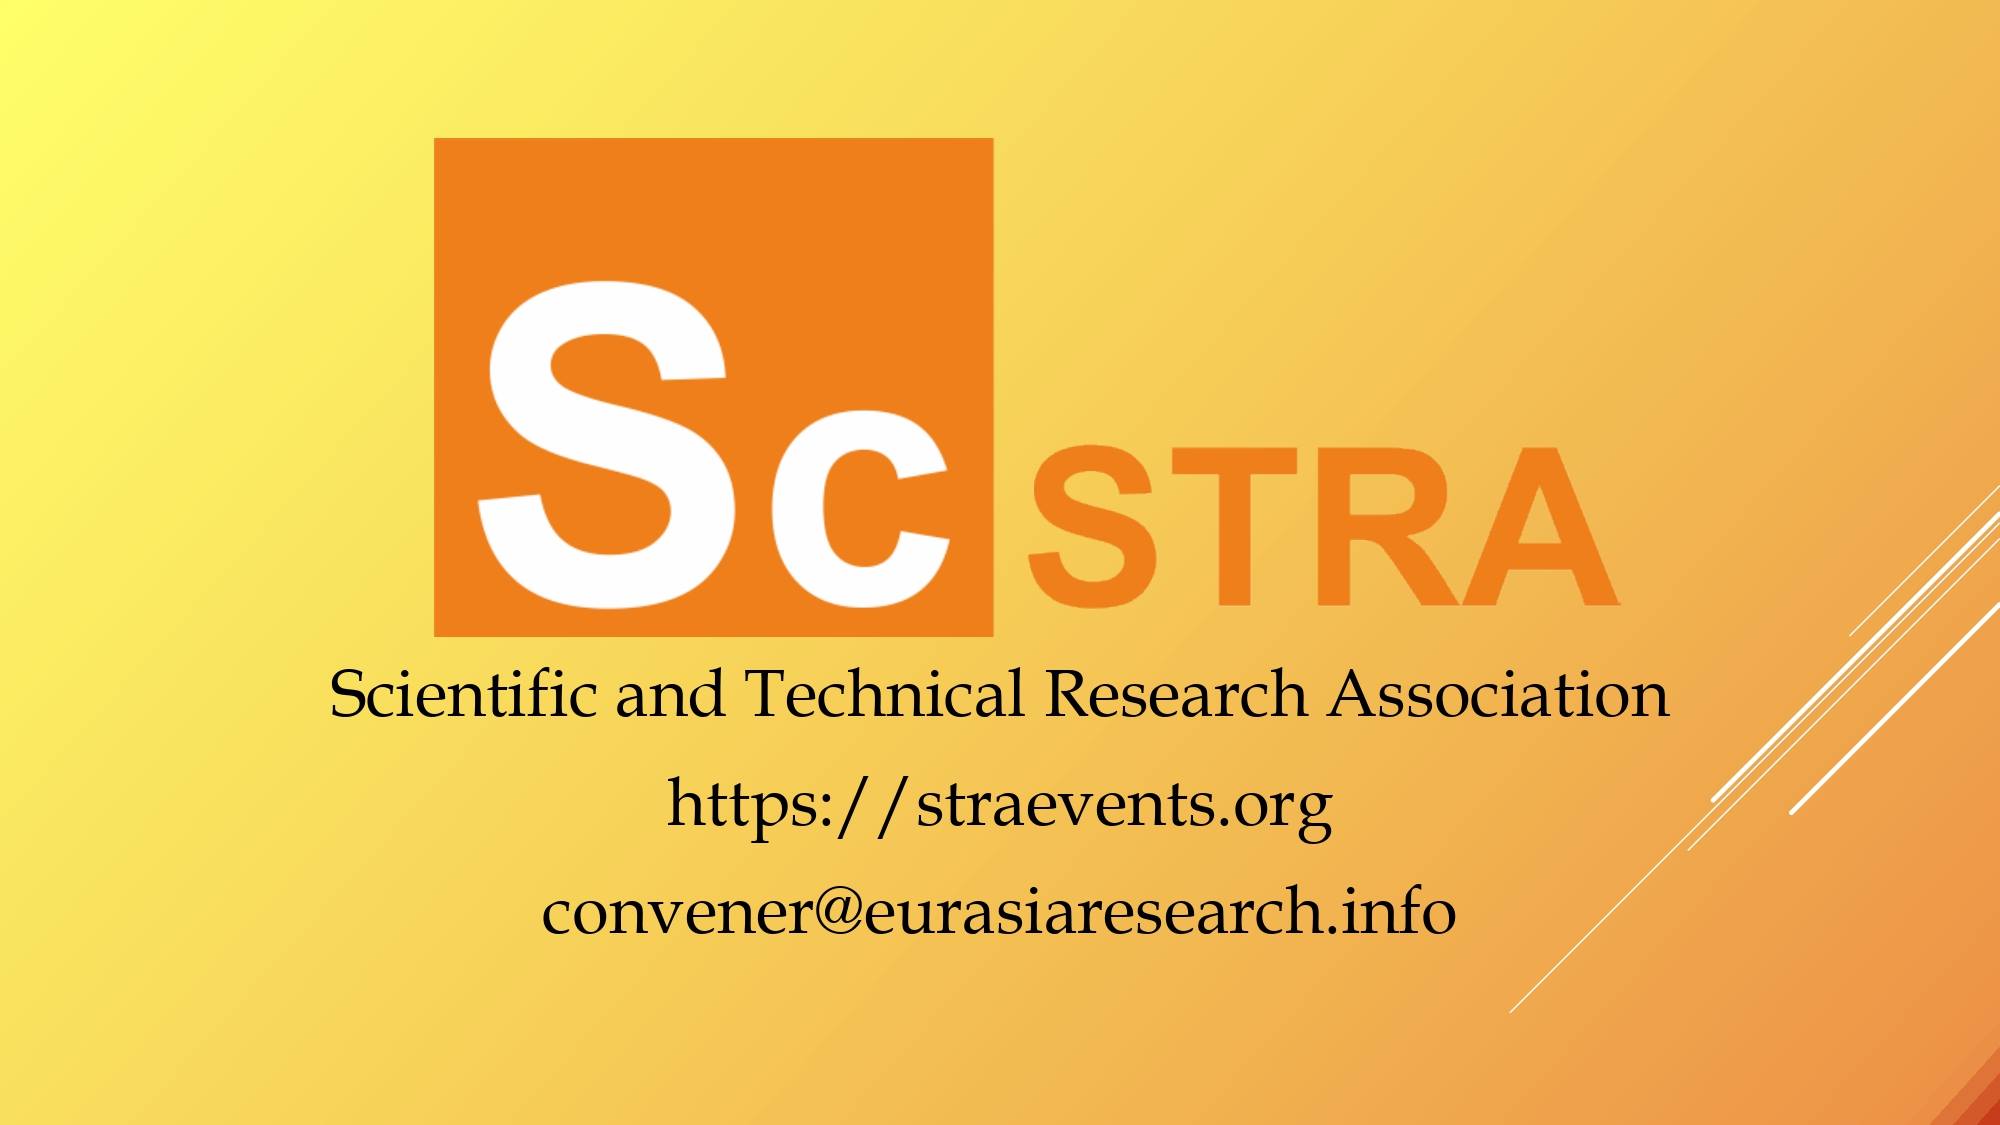 4th ICSTR Paris – International Conference on Science & Technology Research, 27-28 November 2022